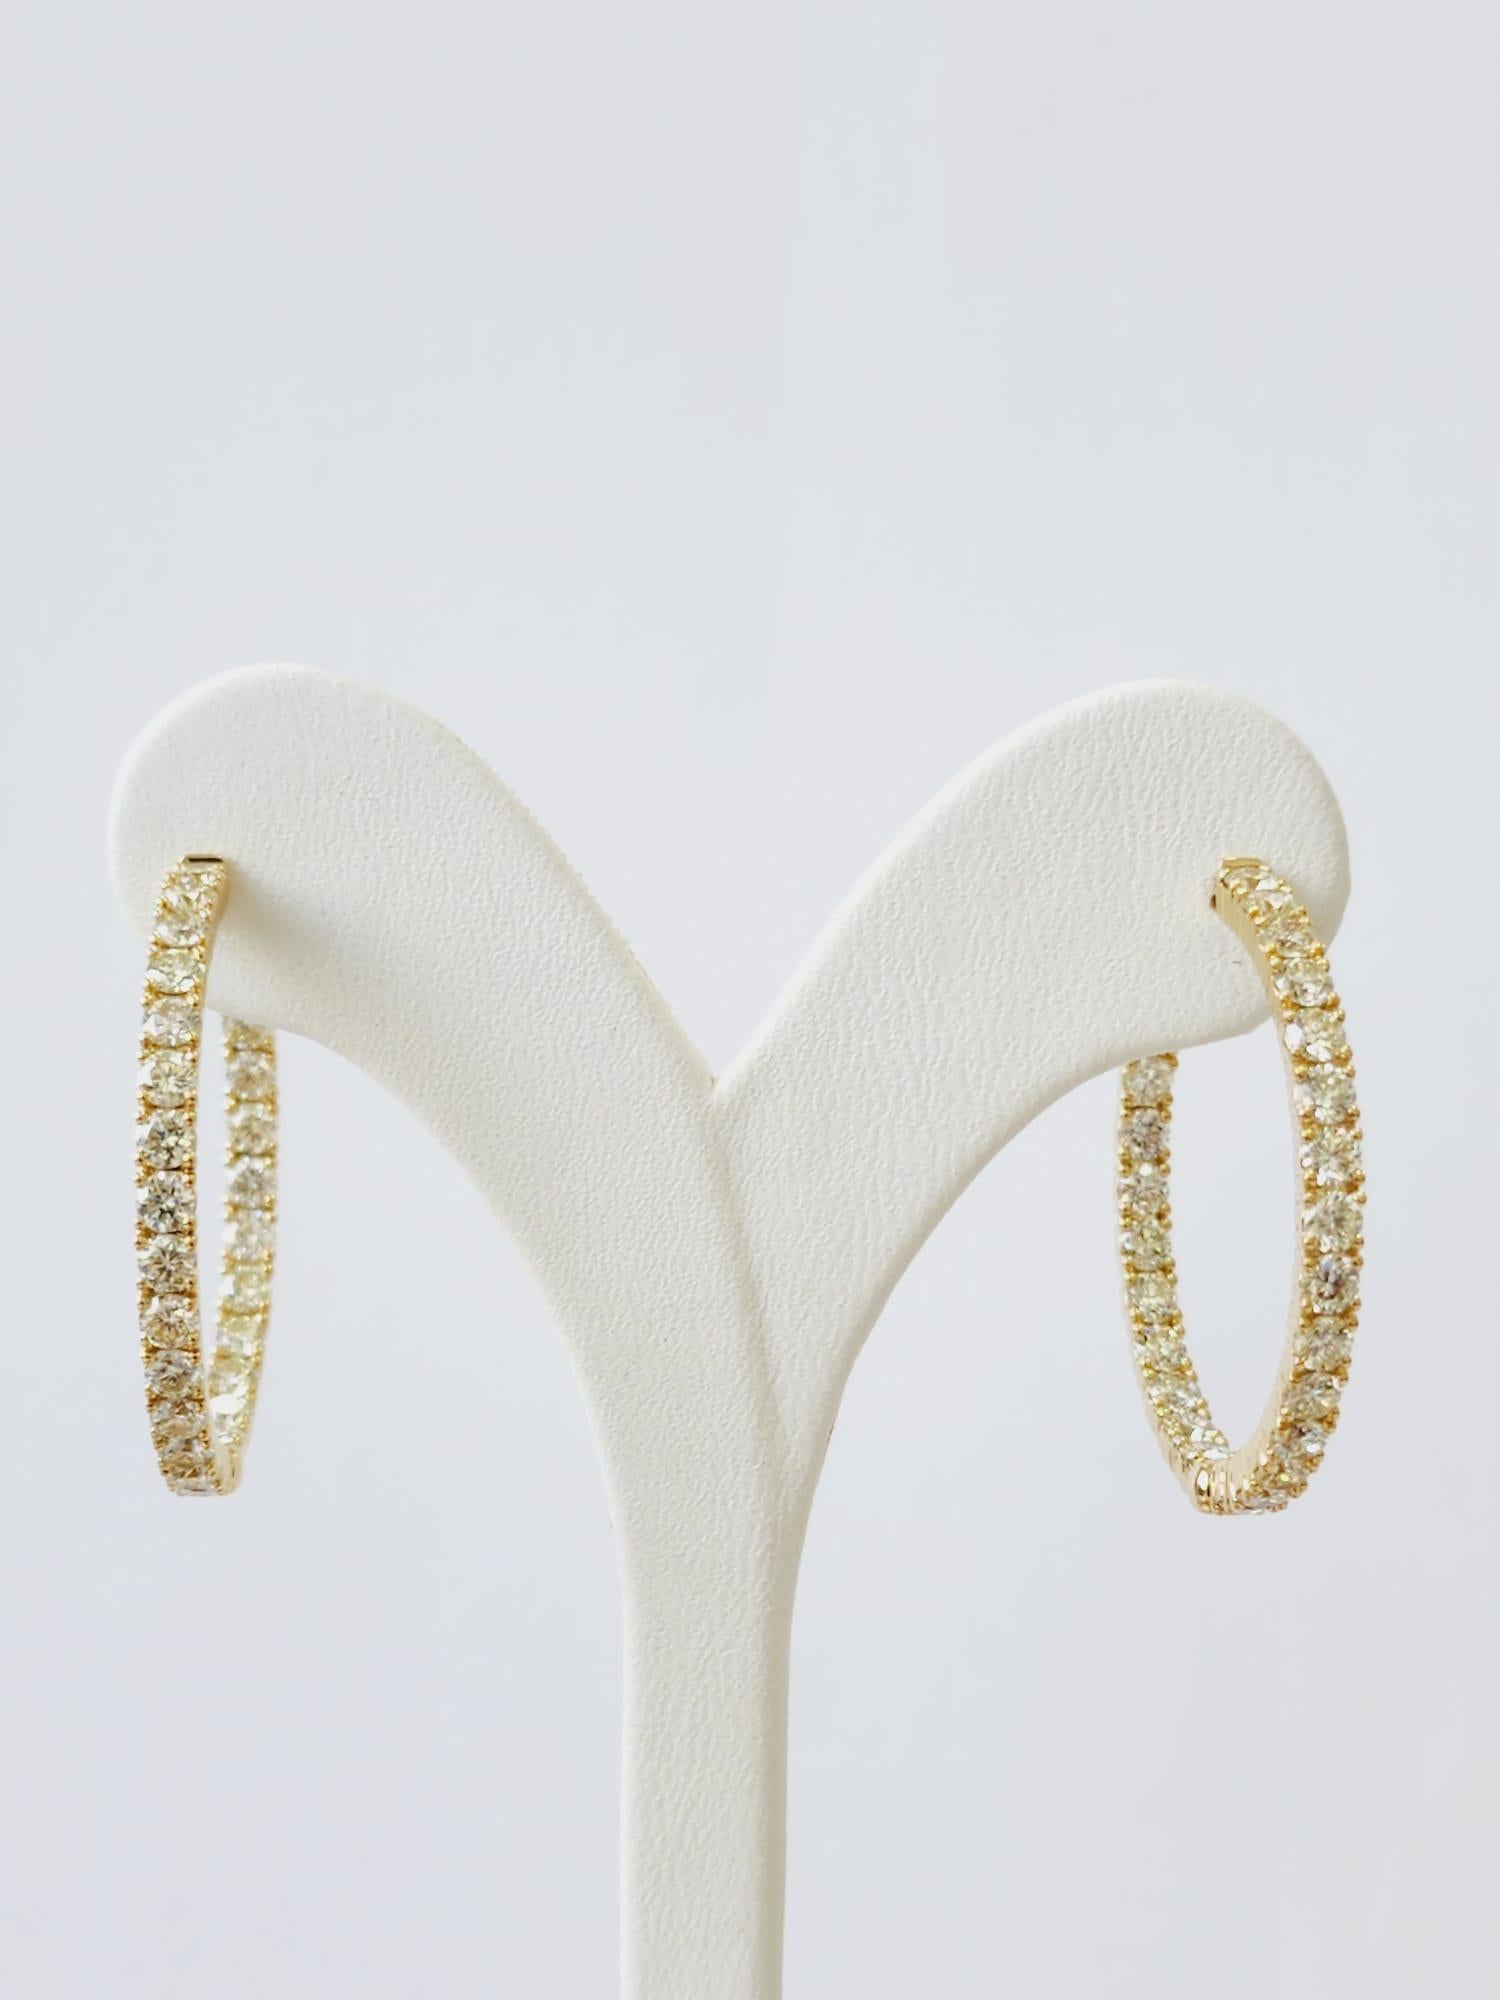 Round Diamond Hoops Earrings Total 4.25 Carat in 18 K Yellow Gold 
Finely arranged round diamonds assorted elegantly in 18 K White Gold hoops for full exposure of 4.25 Carat of natural diamonds! Fun and elegant Hoop Earrings made to create an